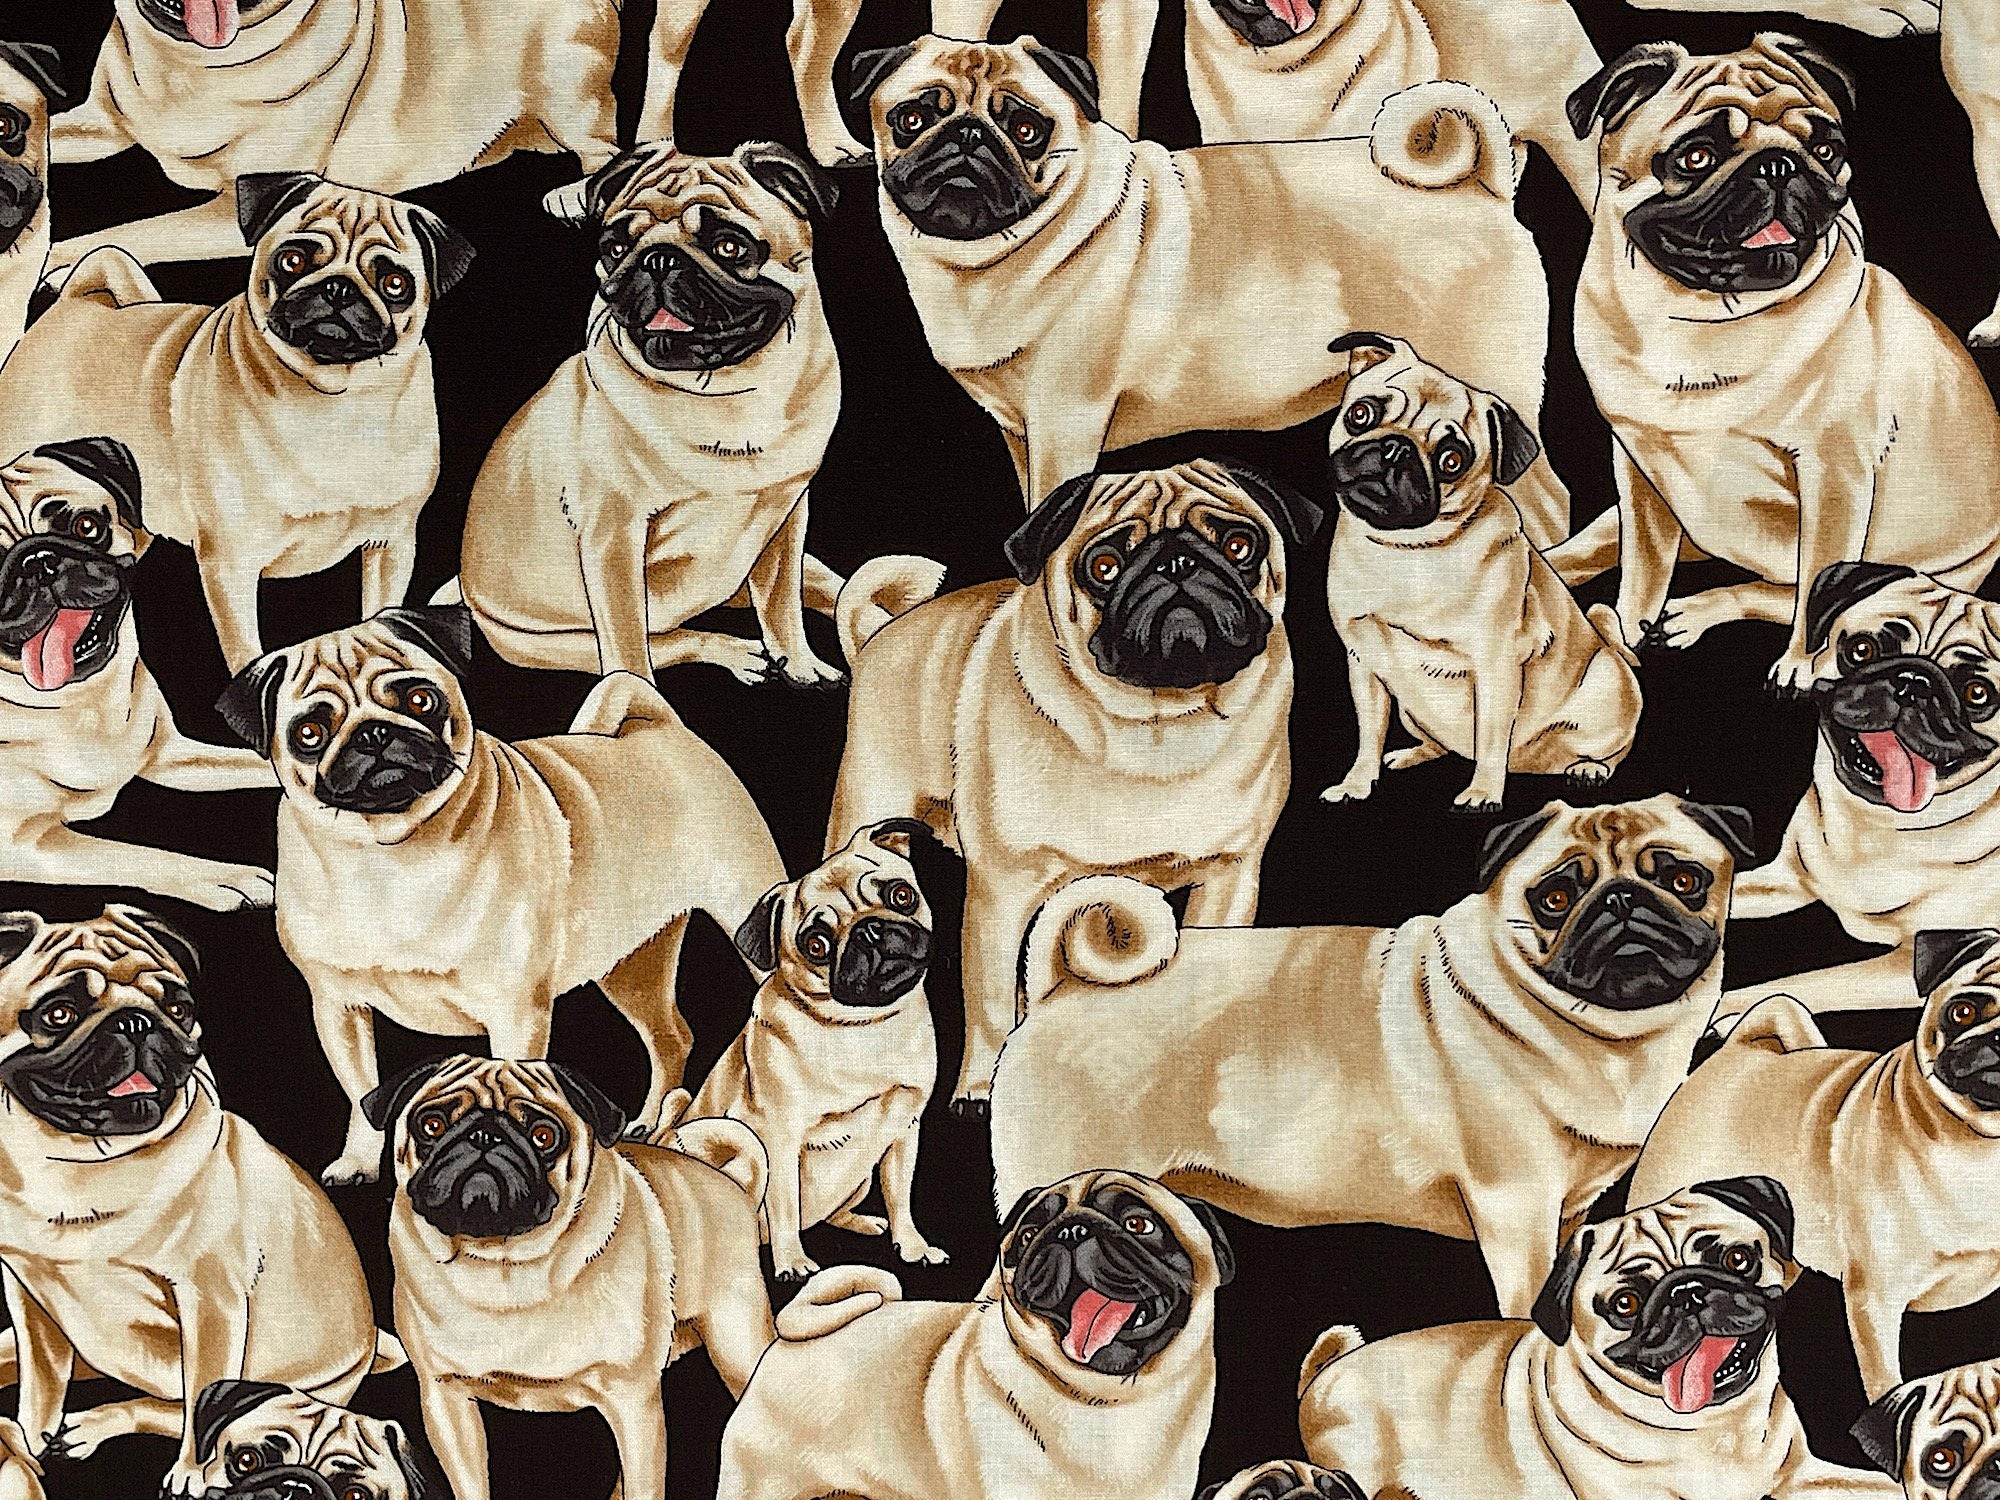 This black cotton fabric is covered with pugs. Some of the pugs are standing and others are laying down and some of the pugs have their tongue out.